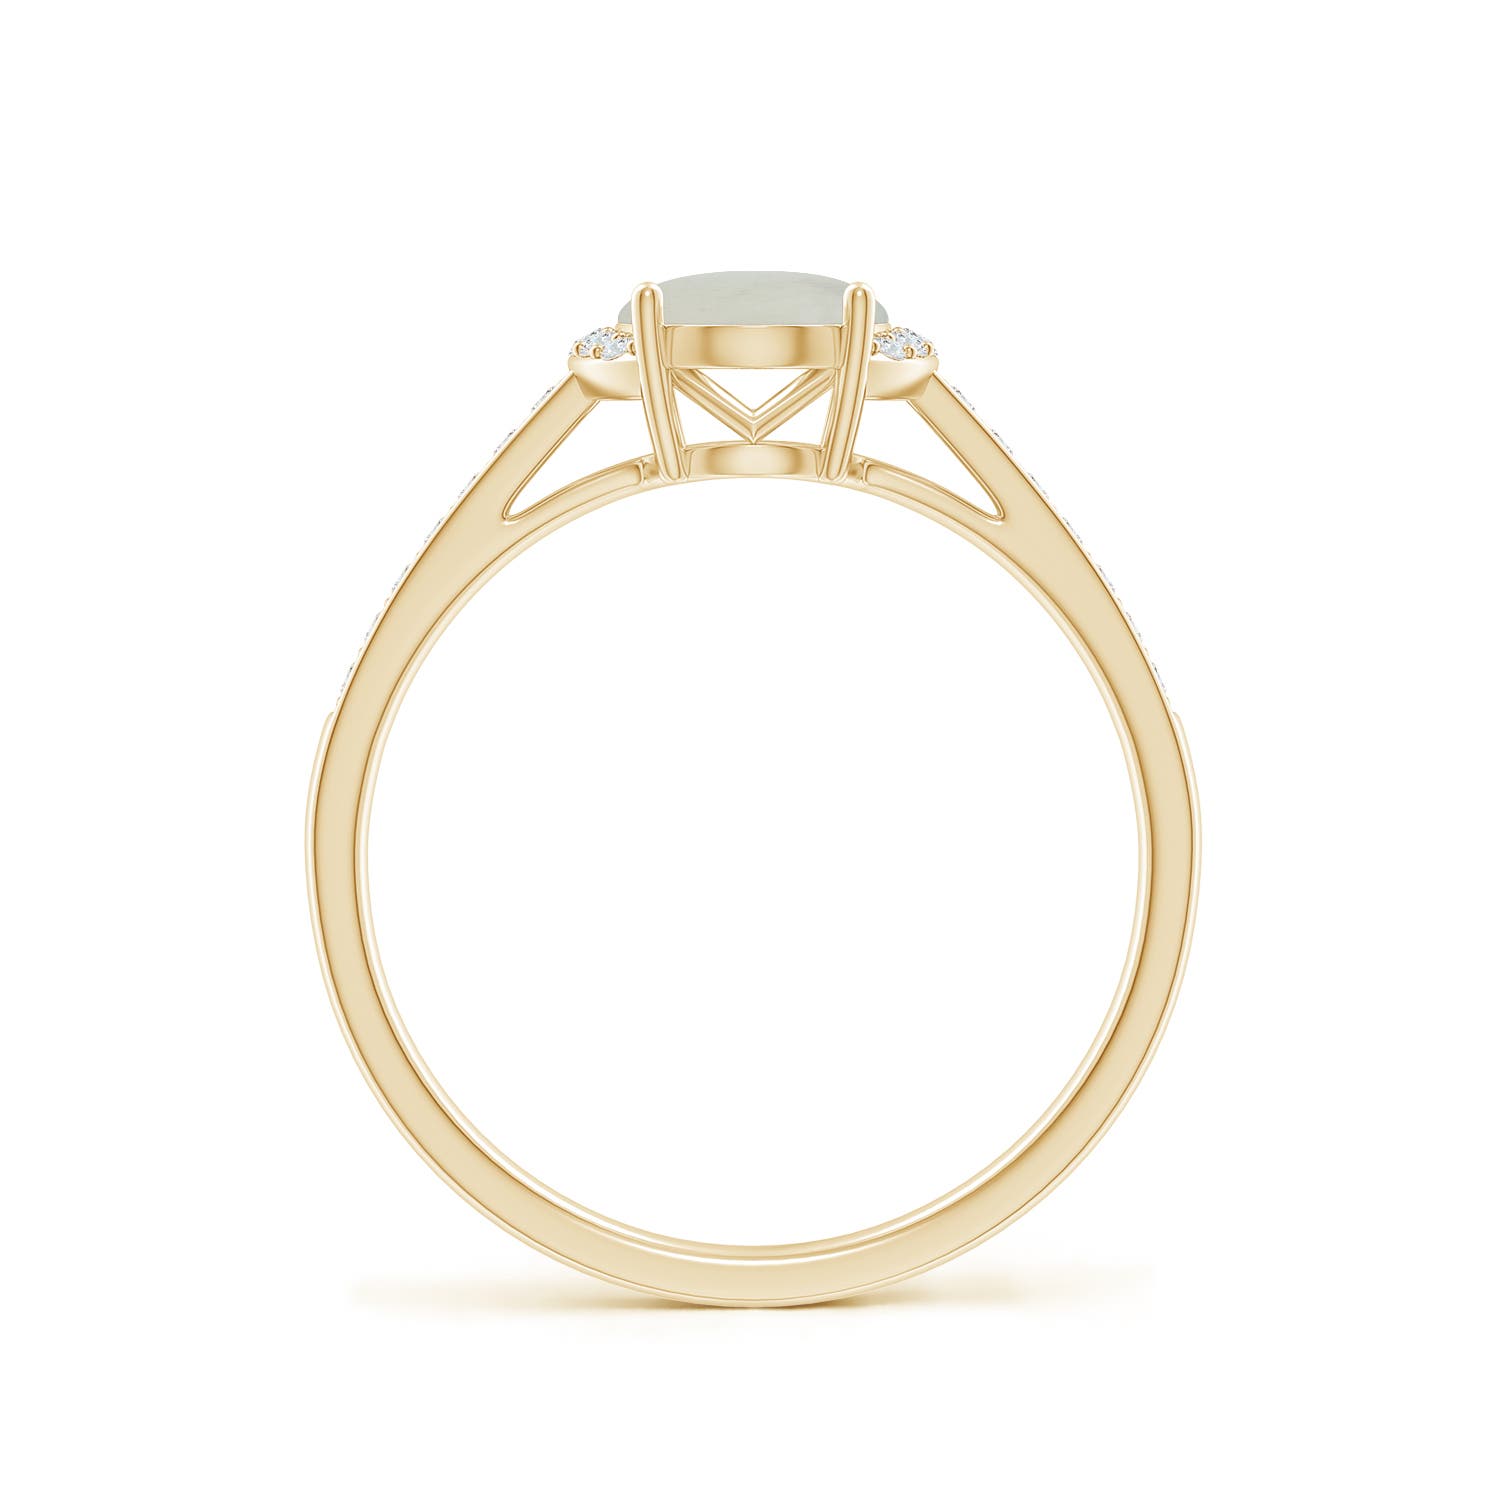 A - Moonstone / 1.23 CT / 14 KT Yellow Gold